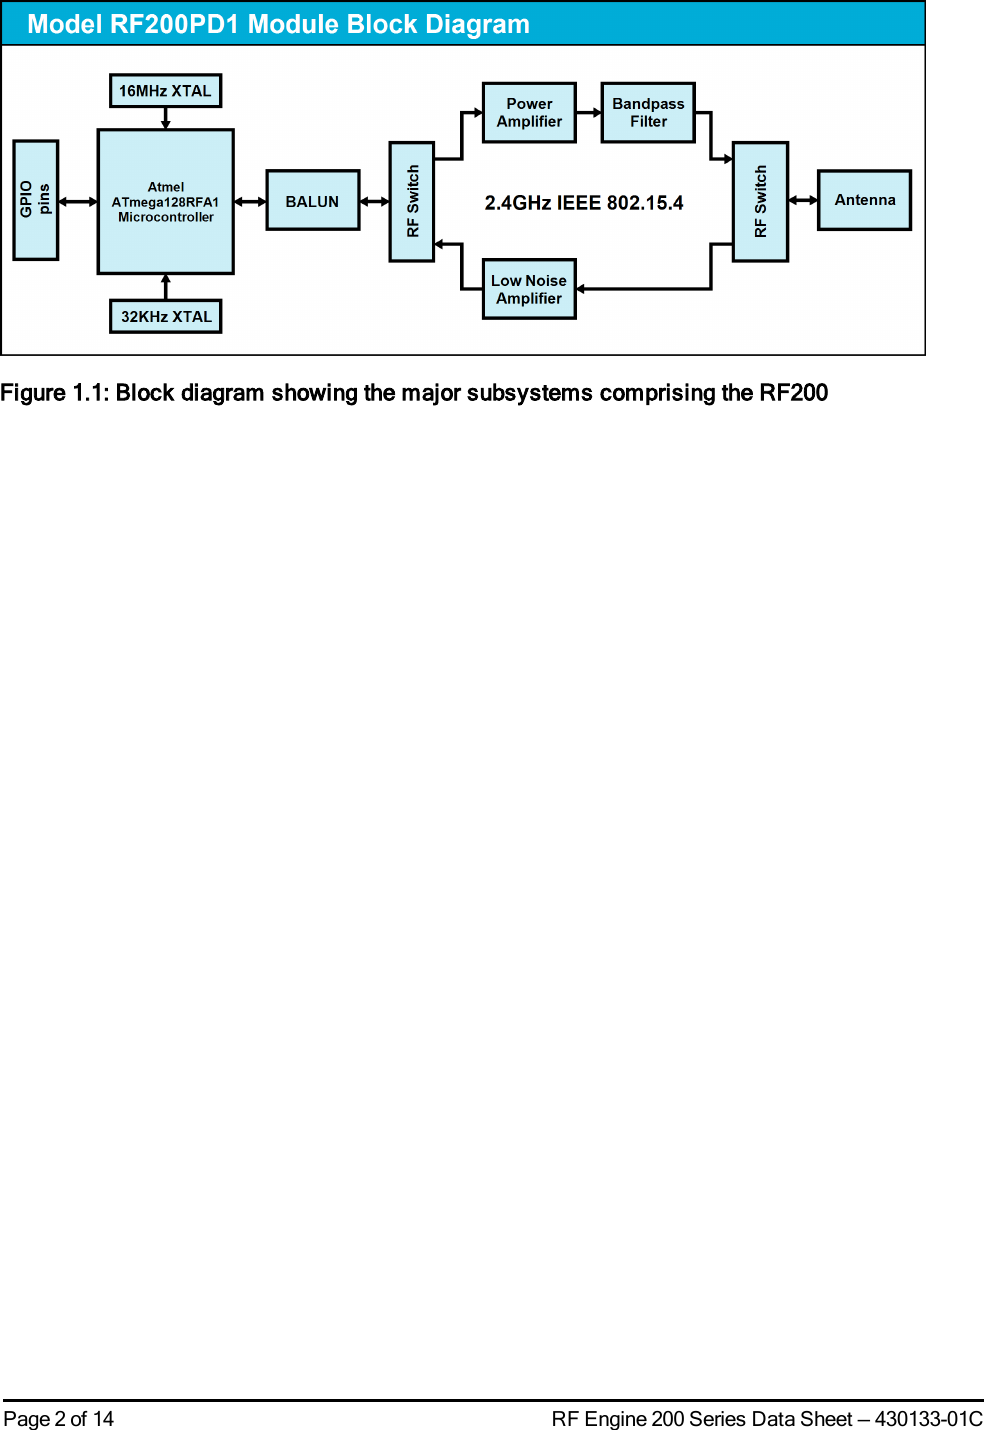 Page 2 of 14 RF Engine 200 Series Data Sheet — 430133-01CFigure 1.1: Block diagram showing the major subsystems comprising the RF200